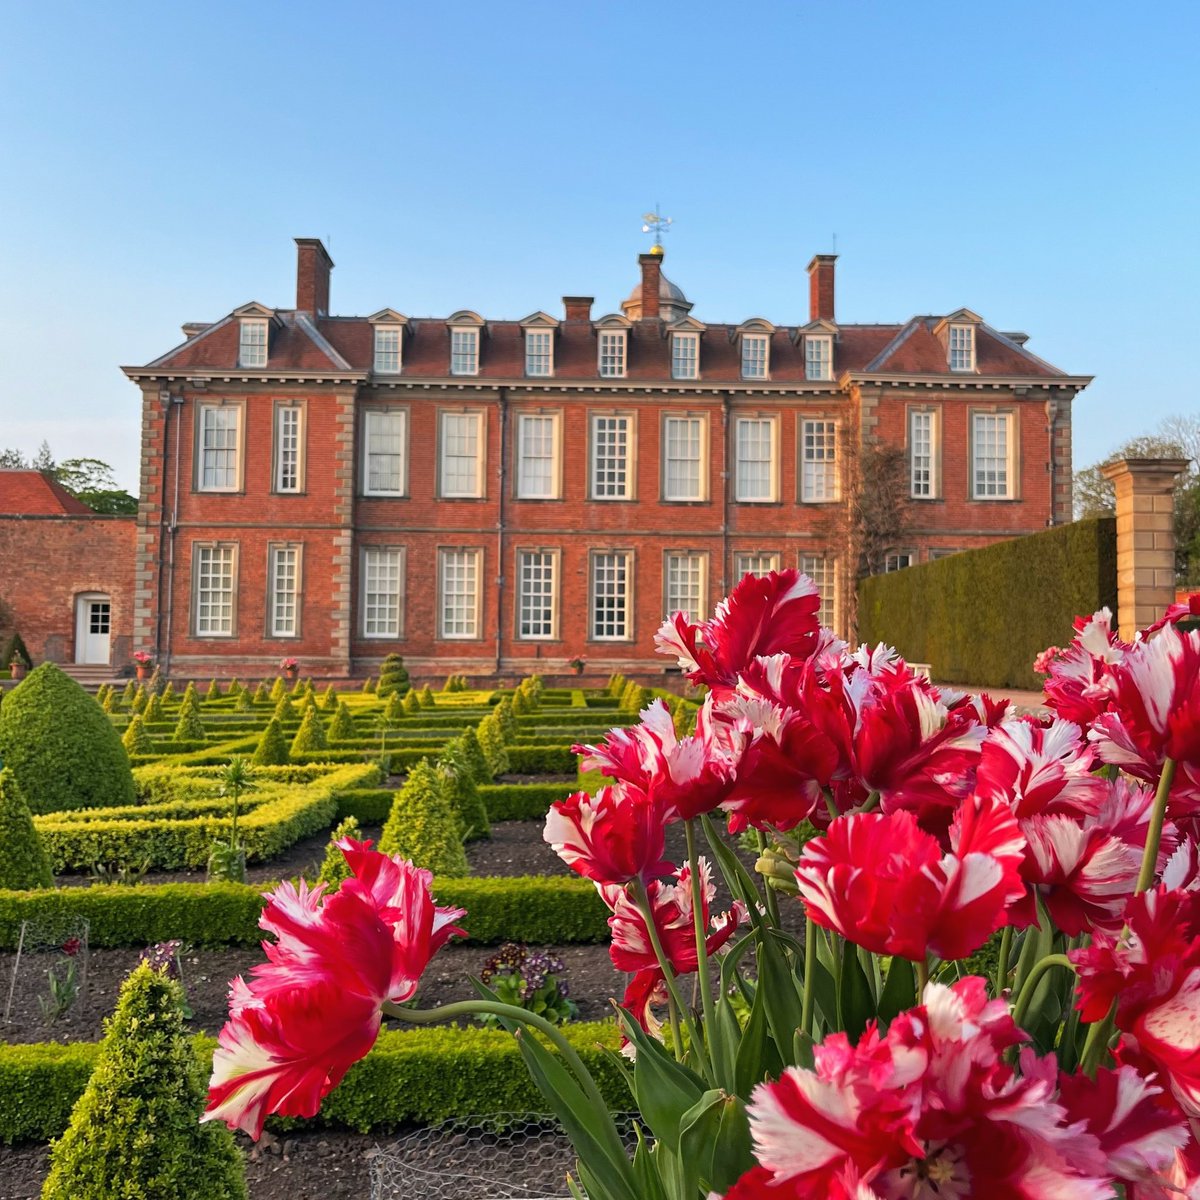 We'd love to know, where have you been exploring this weekend?

Photo: @HanburyHallNT